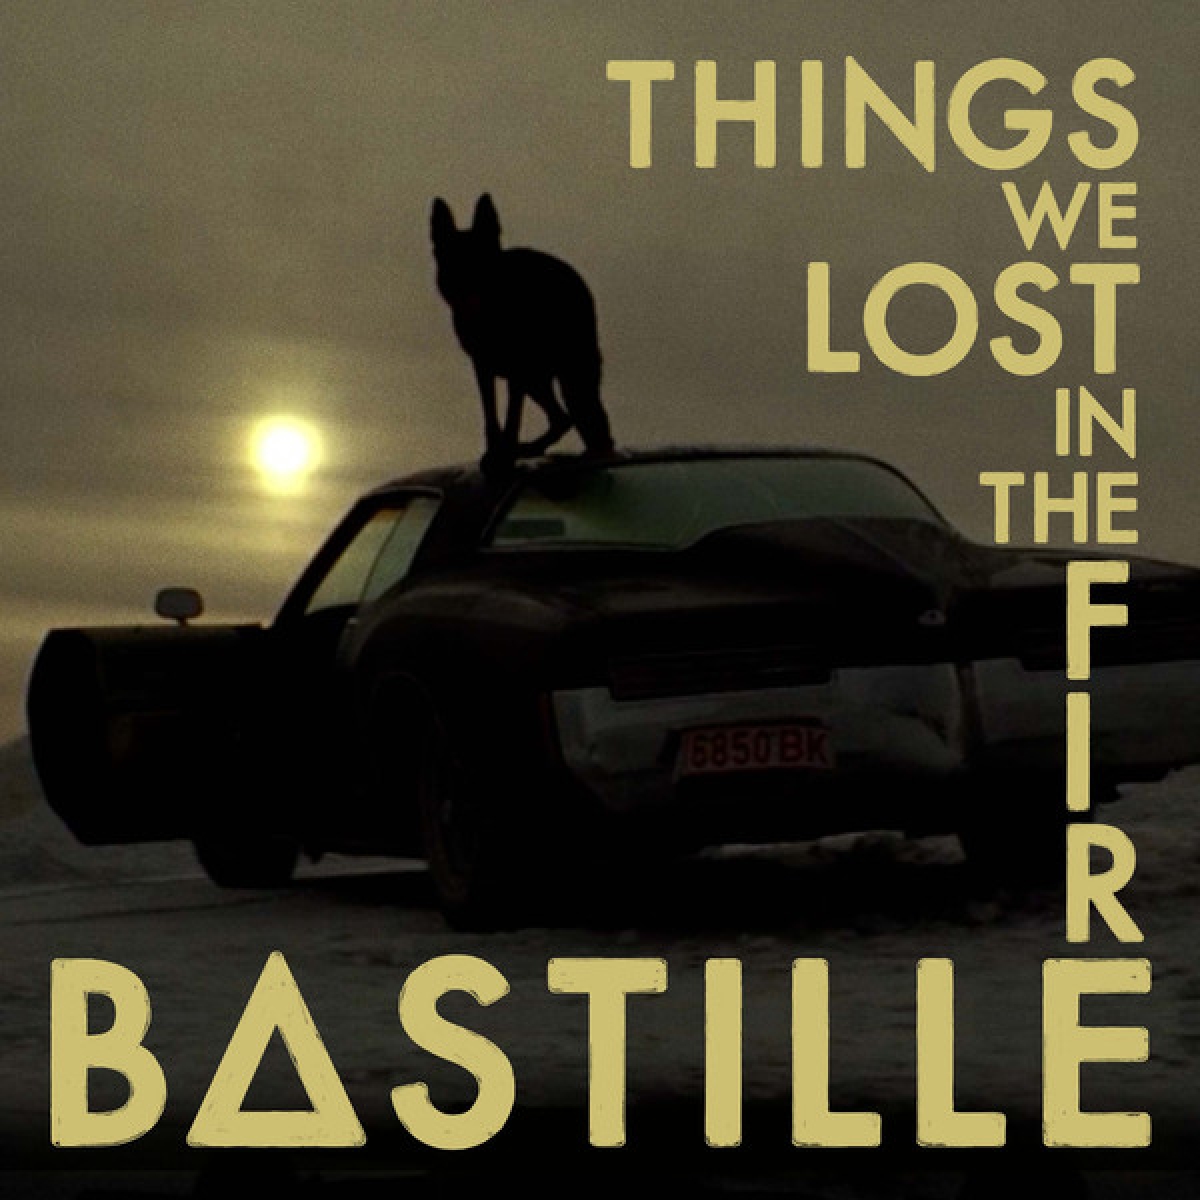 BASTILLE - Things We Lost In The Fire